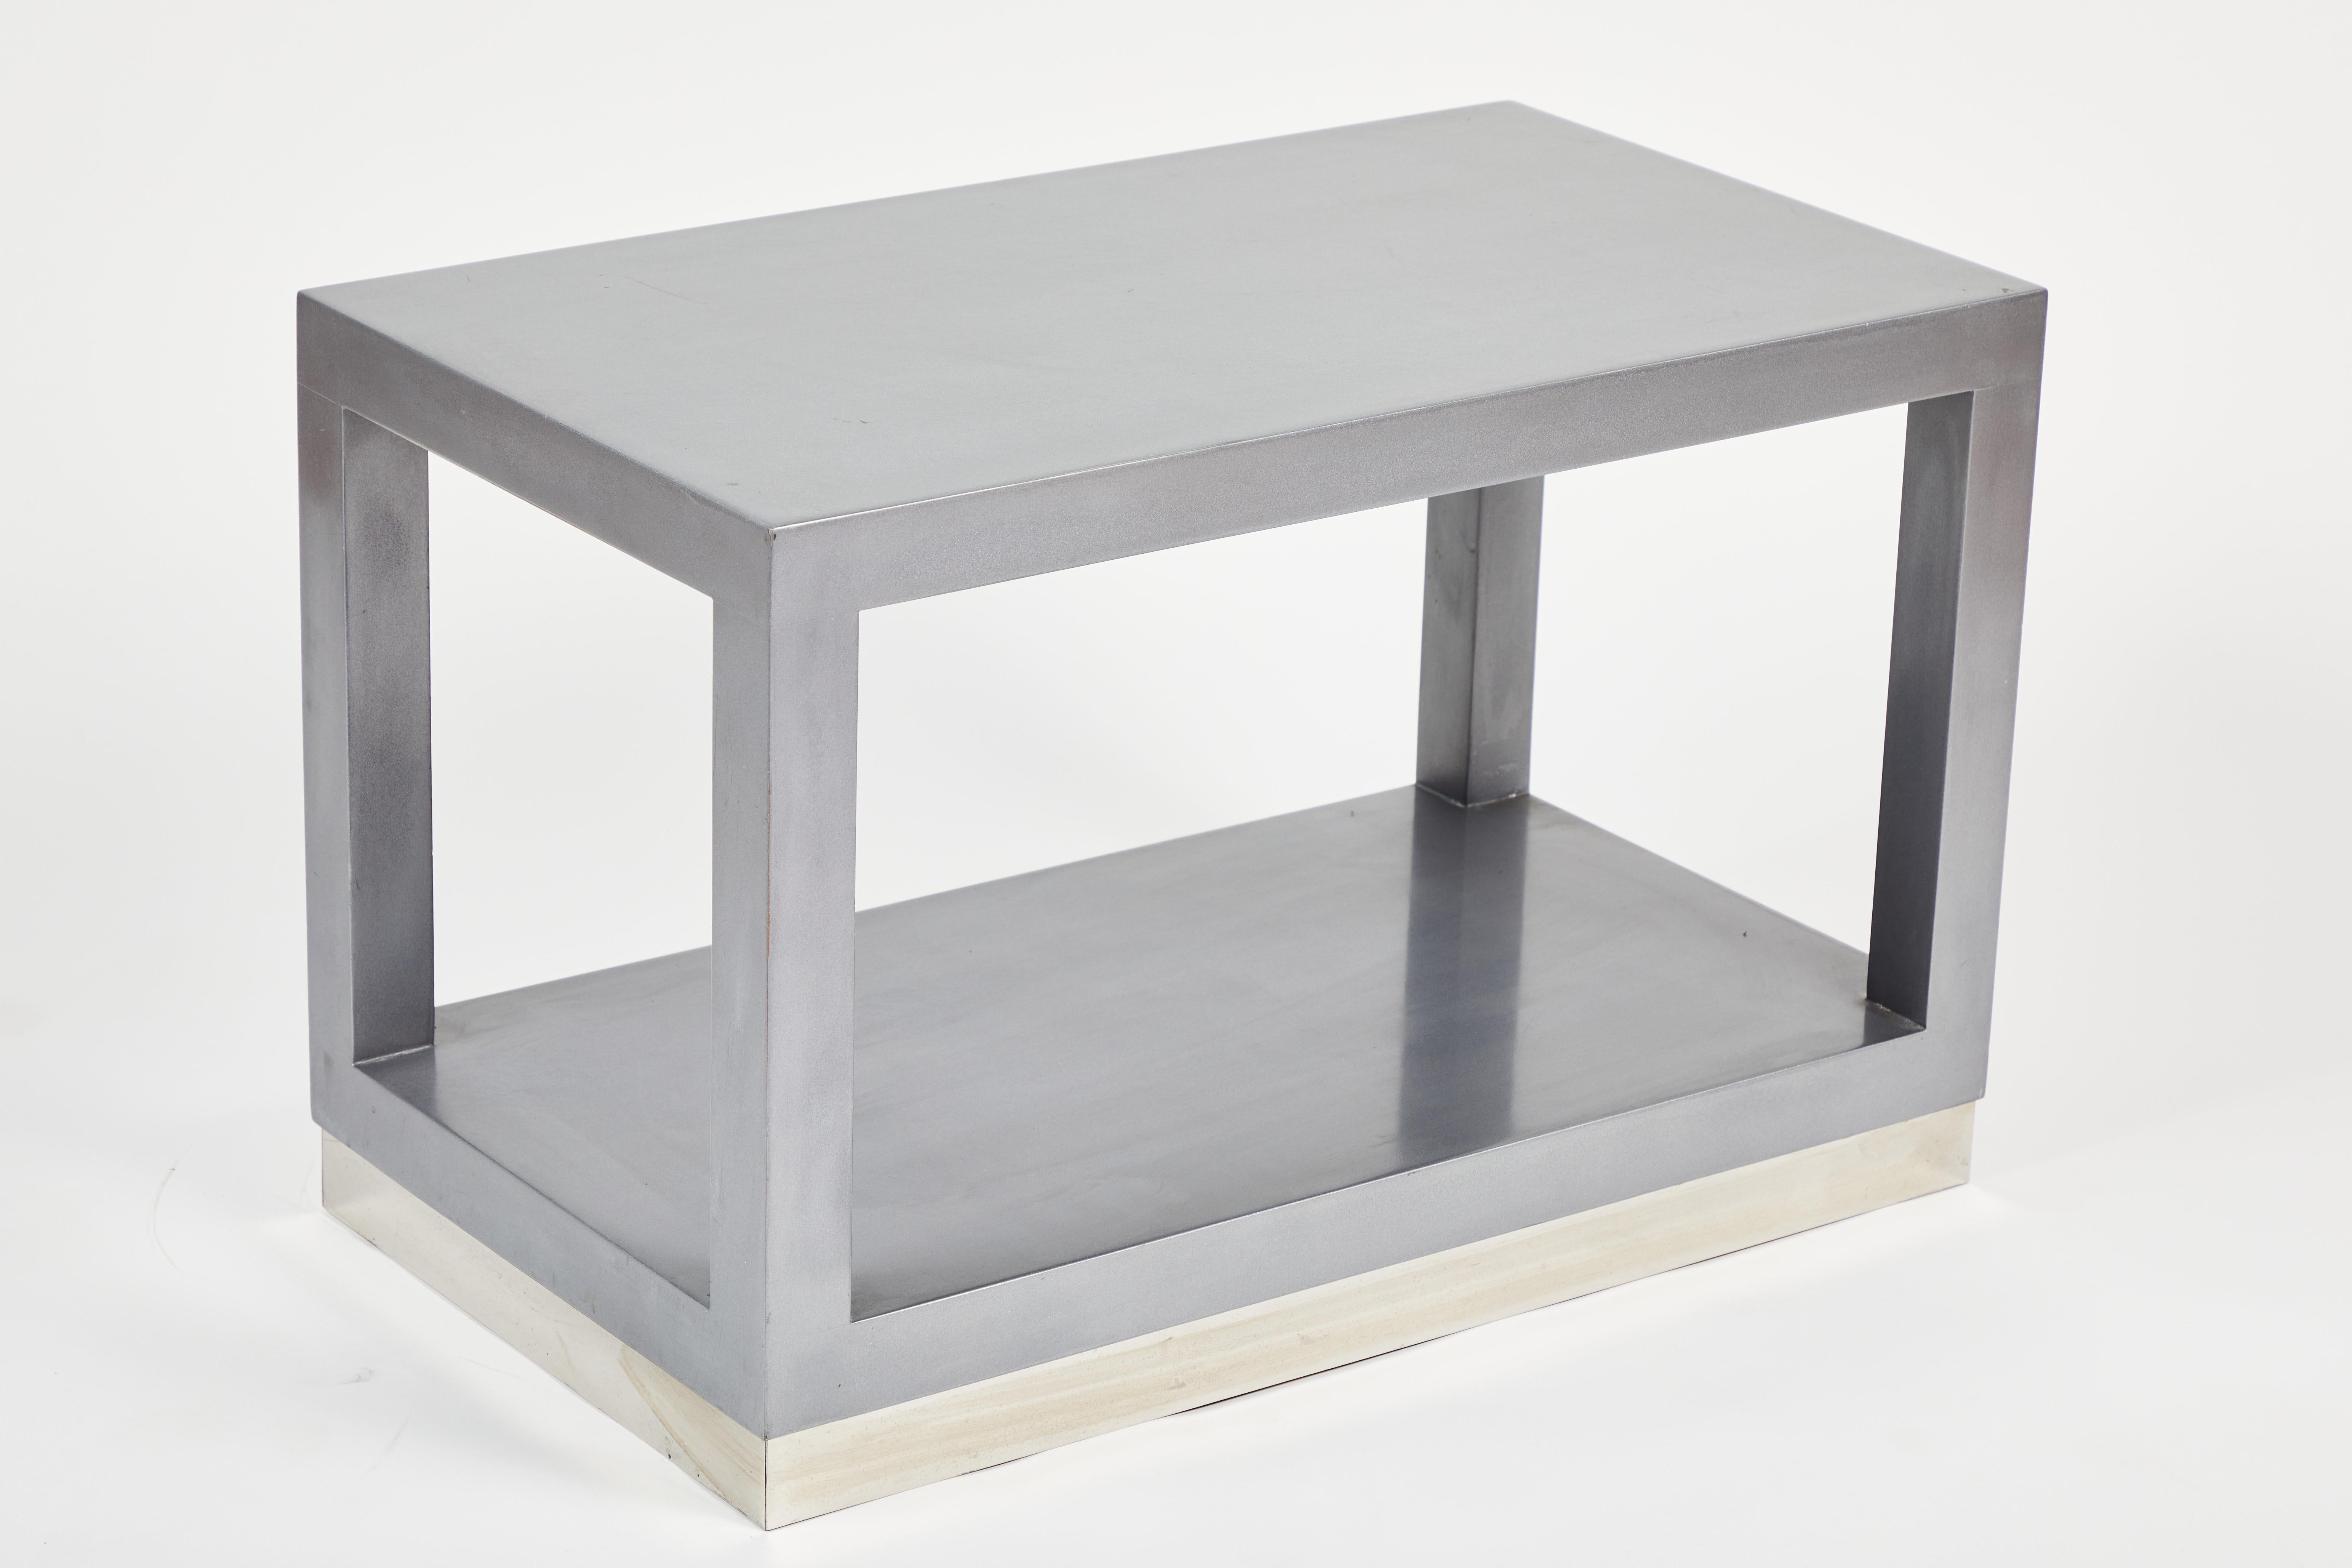 Exceptional side table in the style of Karl Springer with Parsons-style frame, chromed steel base, and enameled wood frame. Minor imperfections to finish, scratches at table underside.